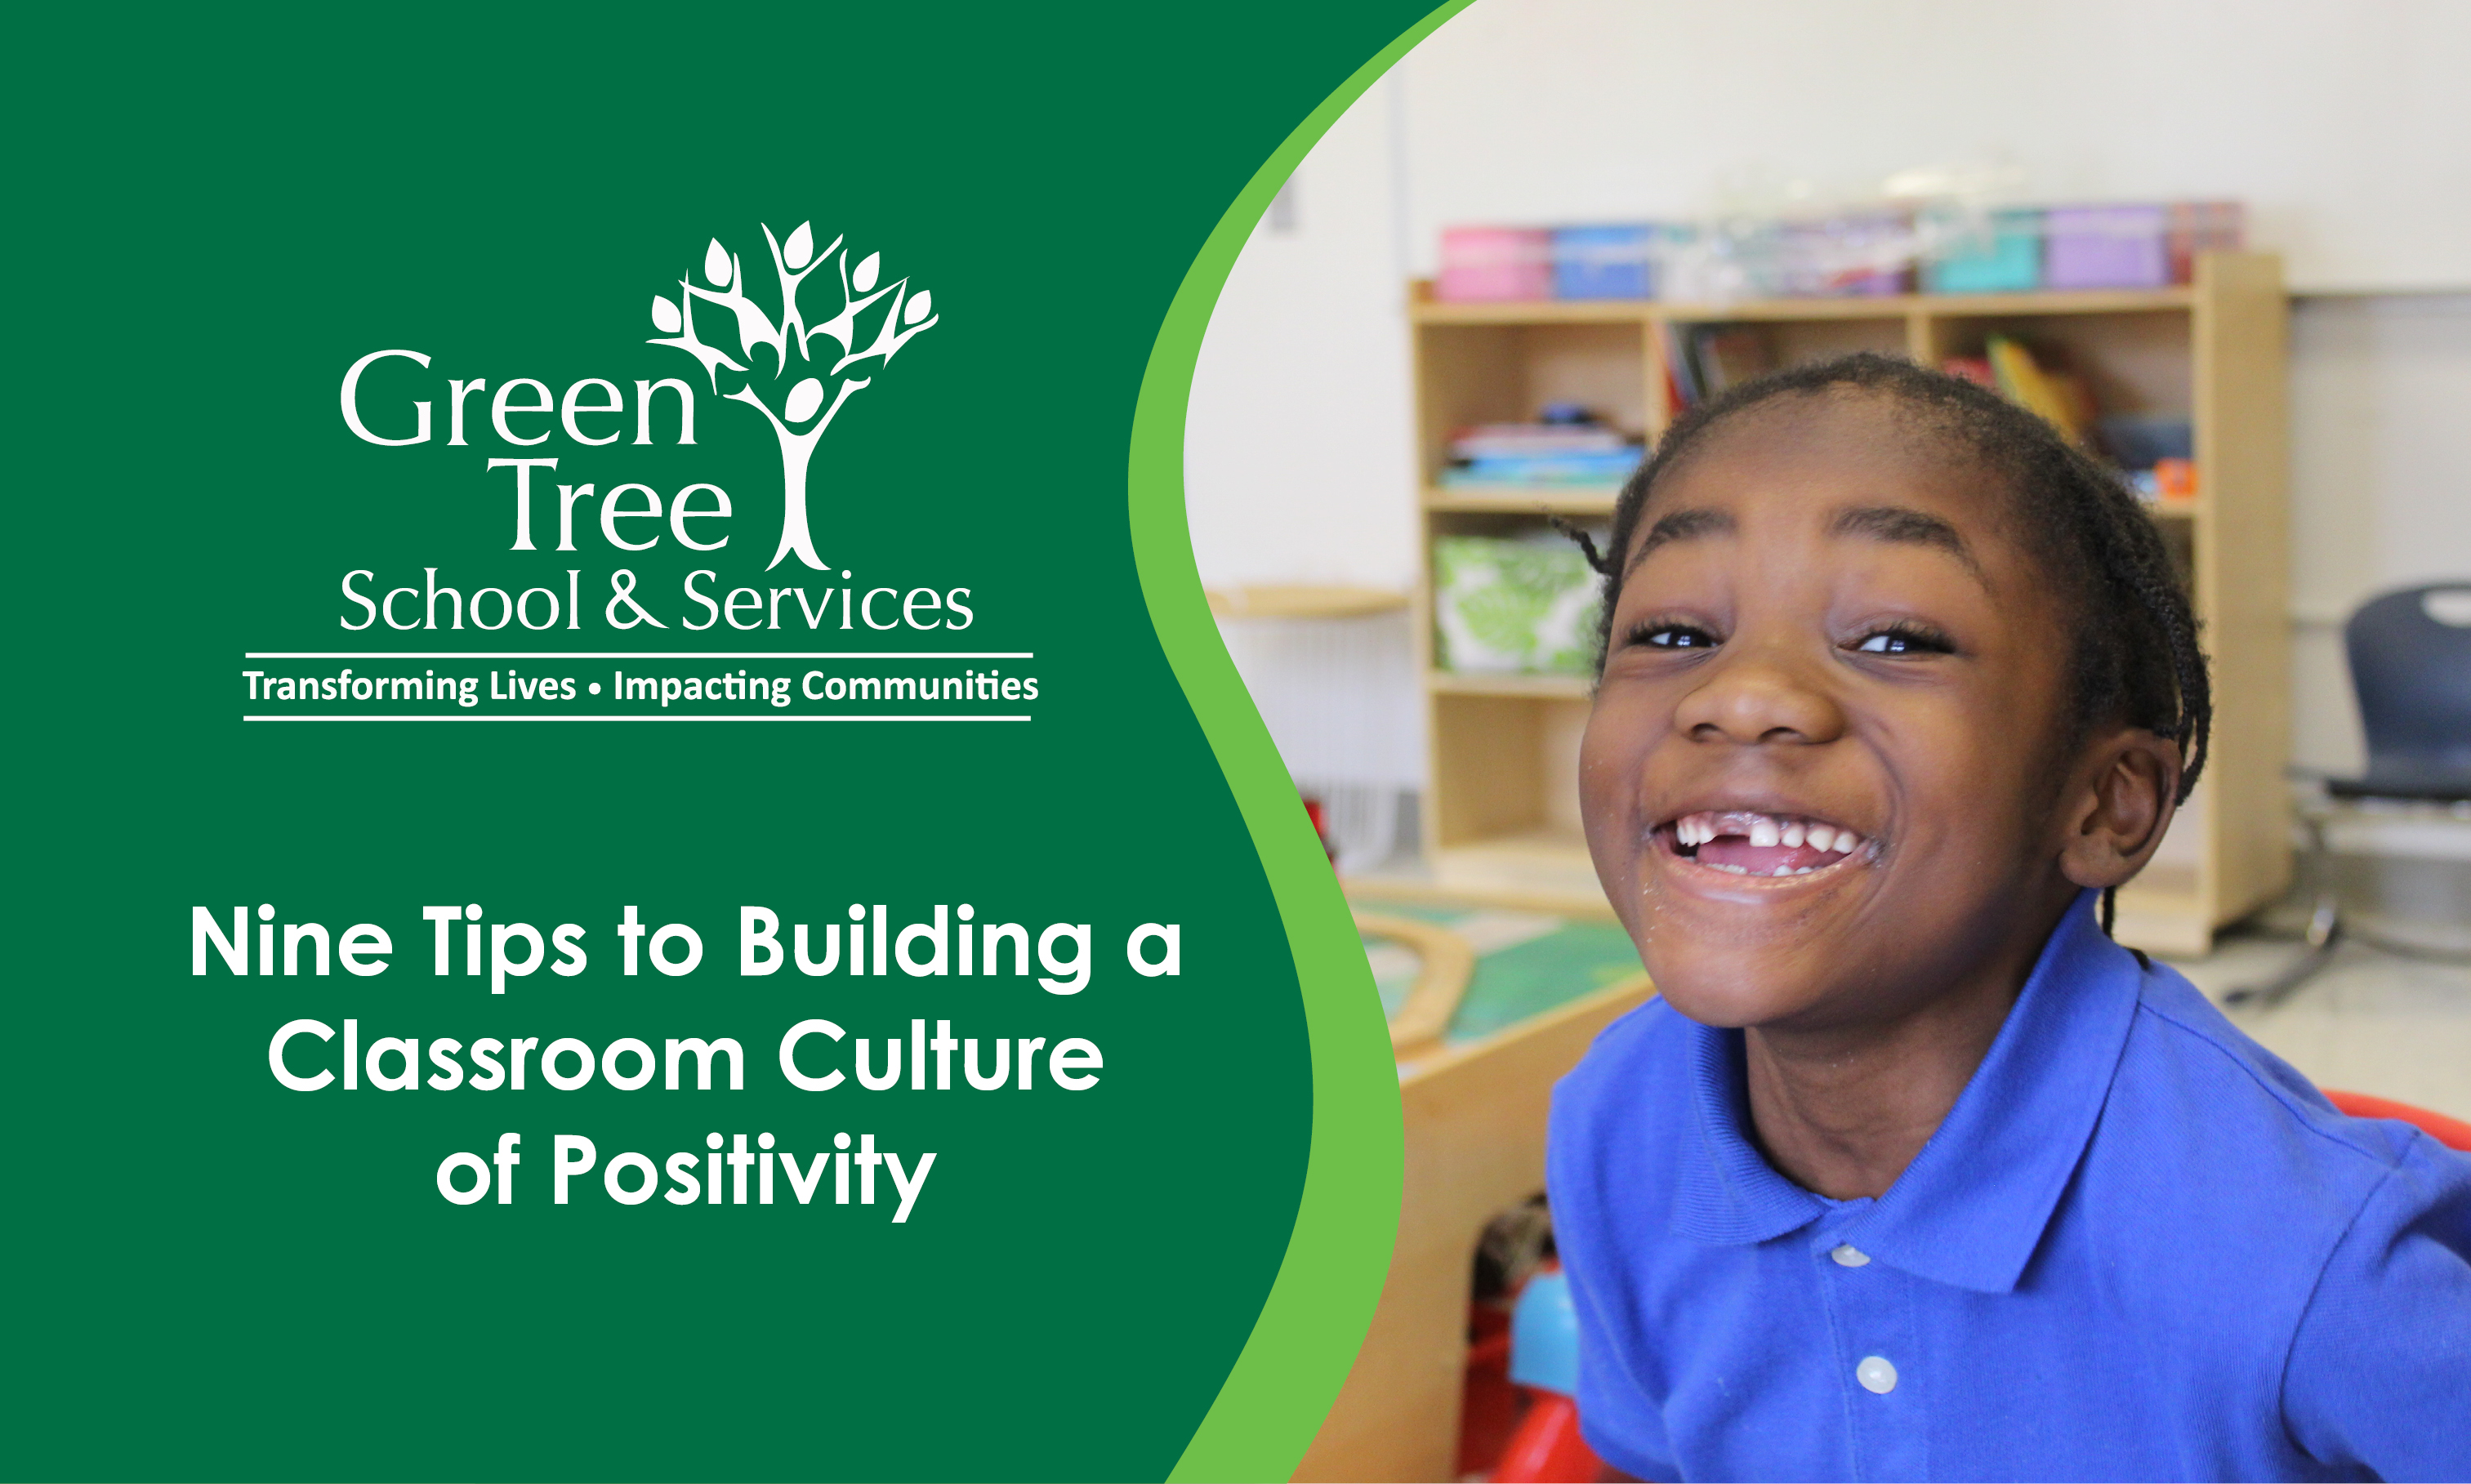 Nine Tips to Building a Classroom Culture of Positivity